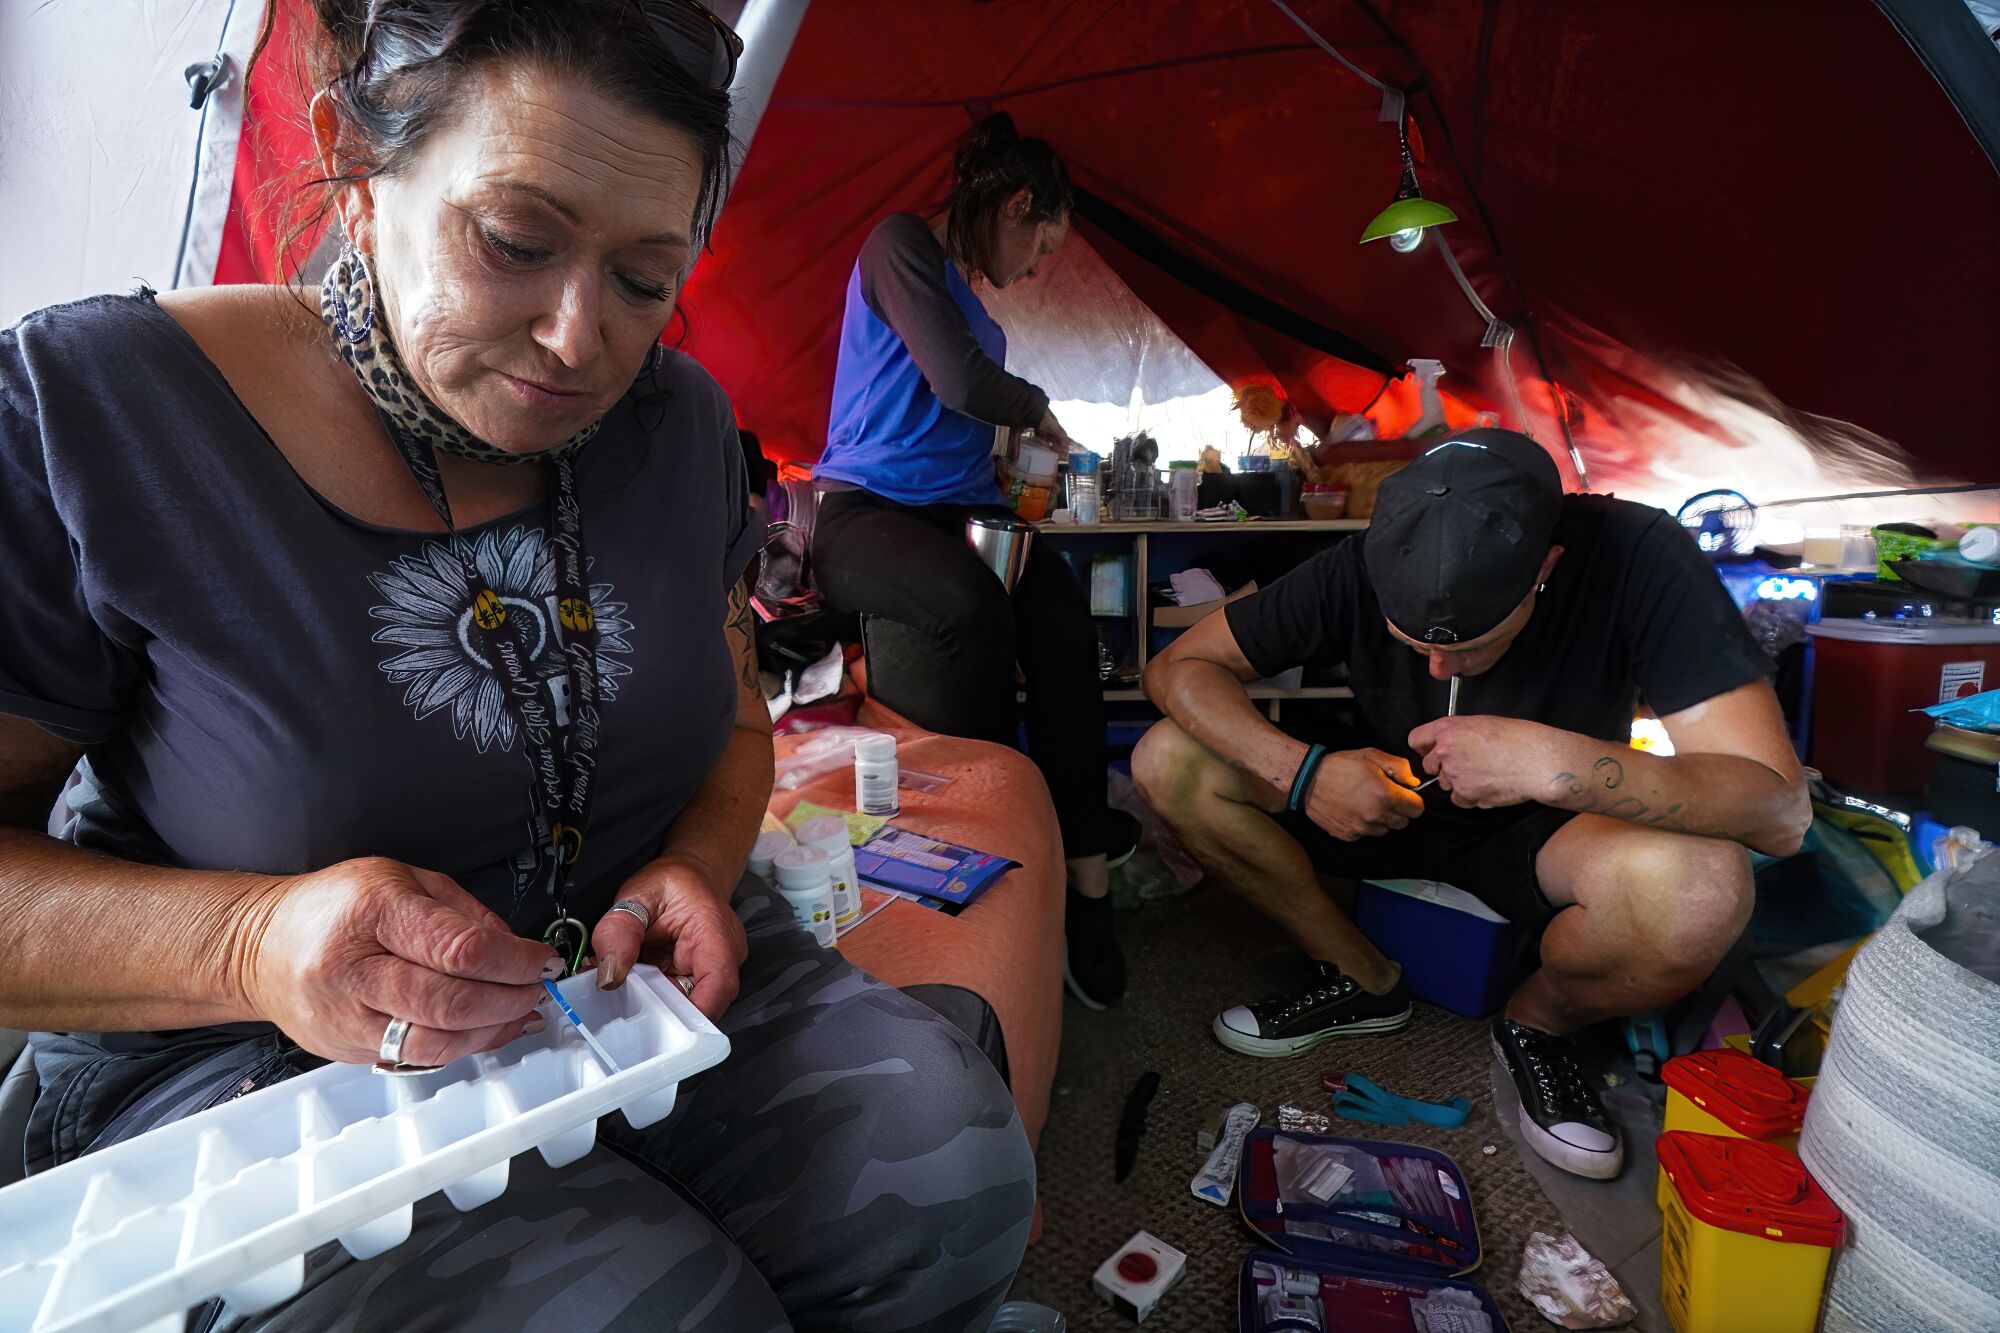 A man smokes fentanyl inside his tent at a homeless encampment in San Diego